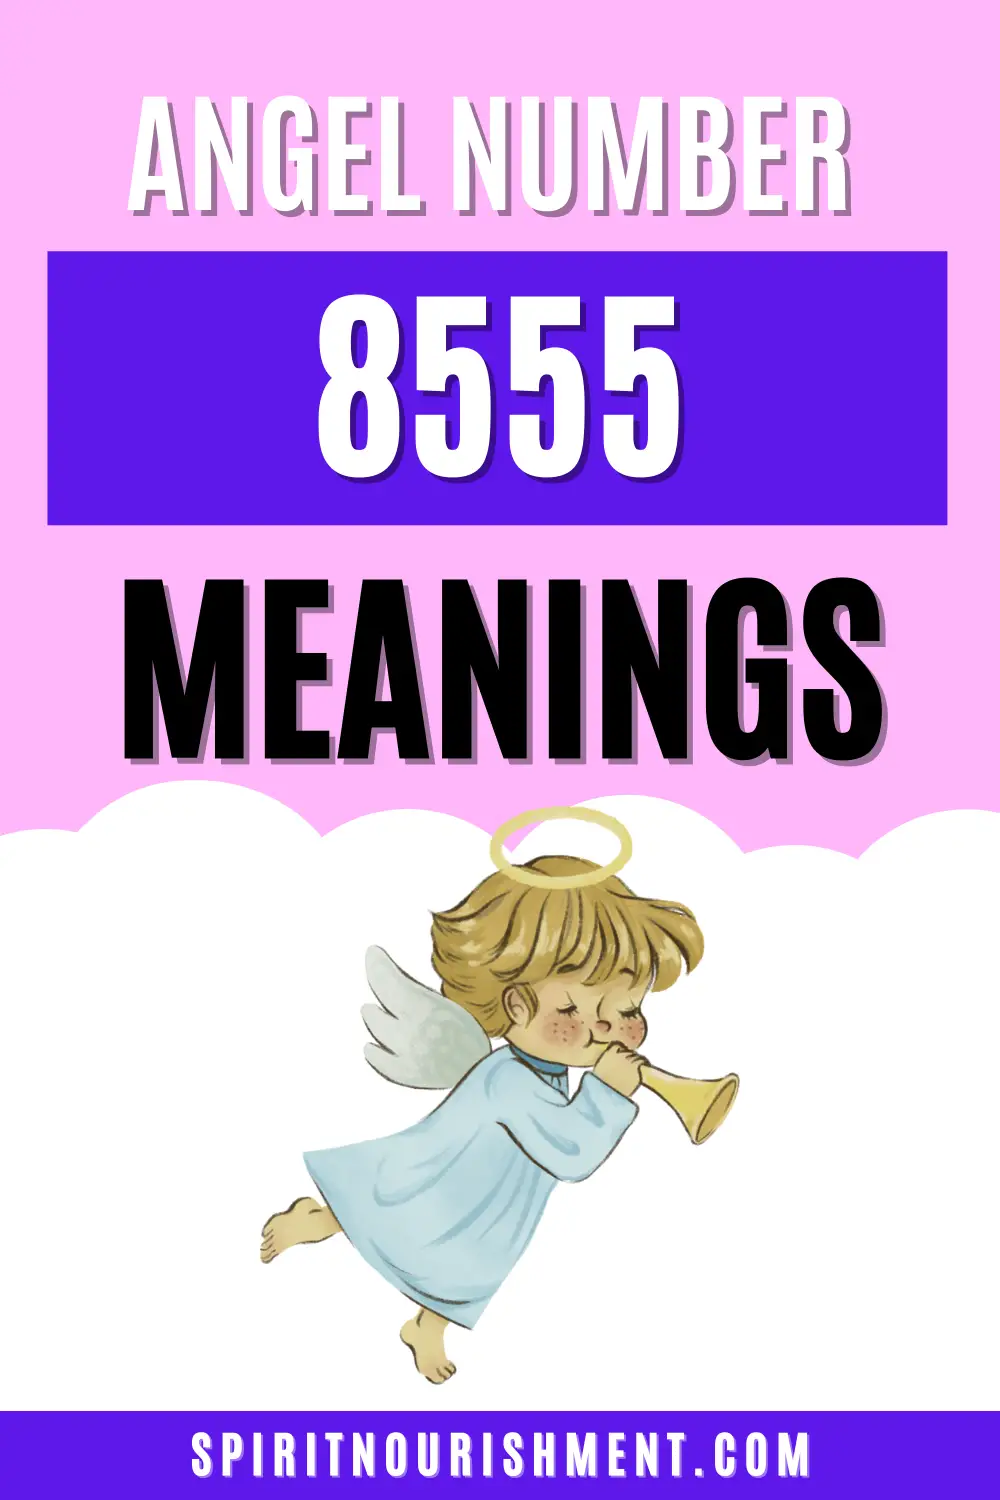 Angel Number 8555 Meaning Spiritual, Bible, Love & Twin Flames, Numerology